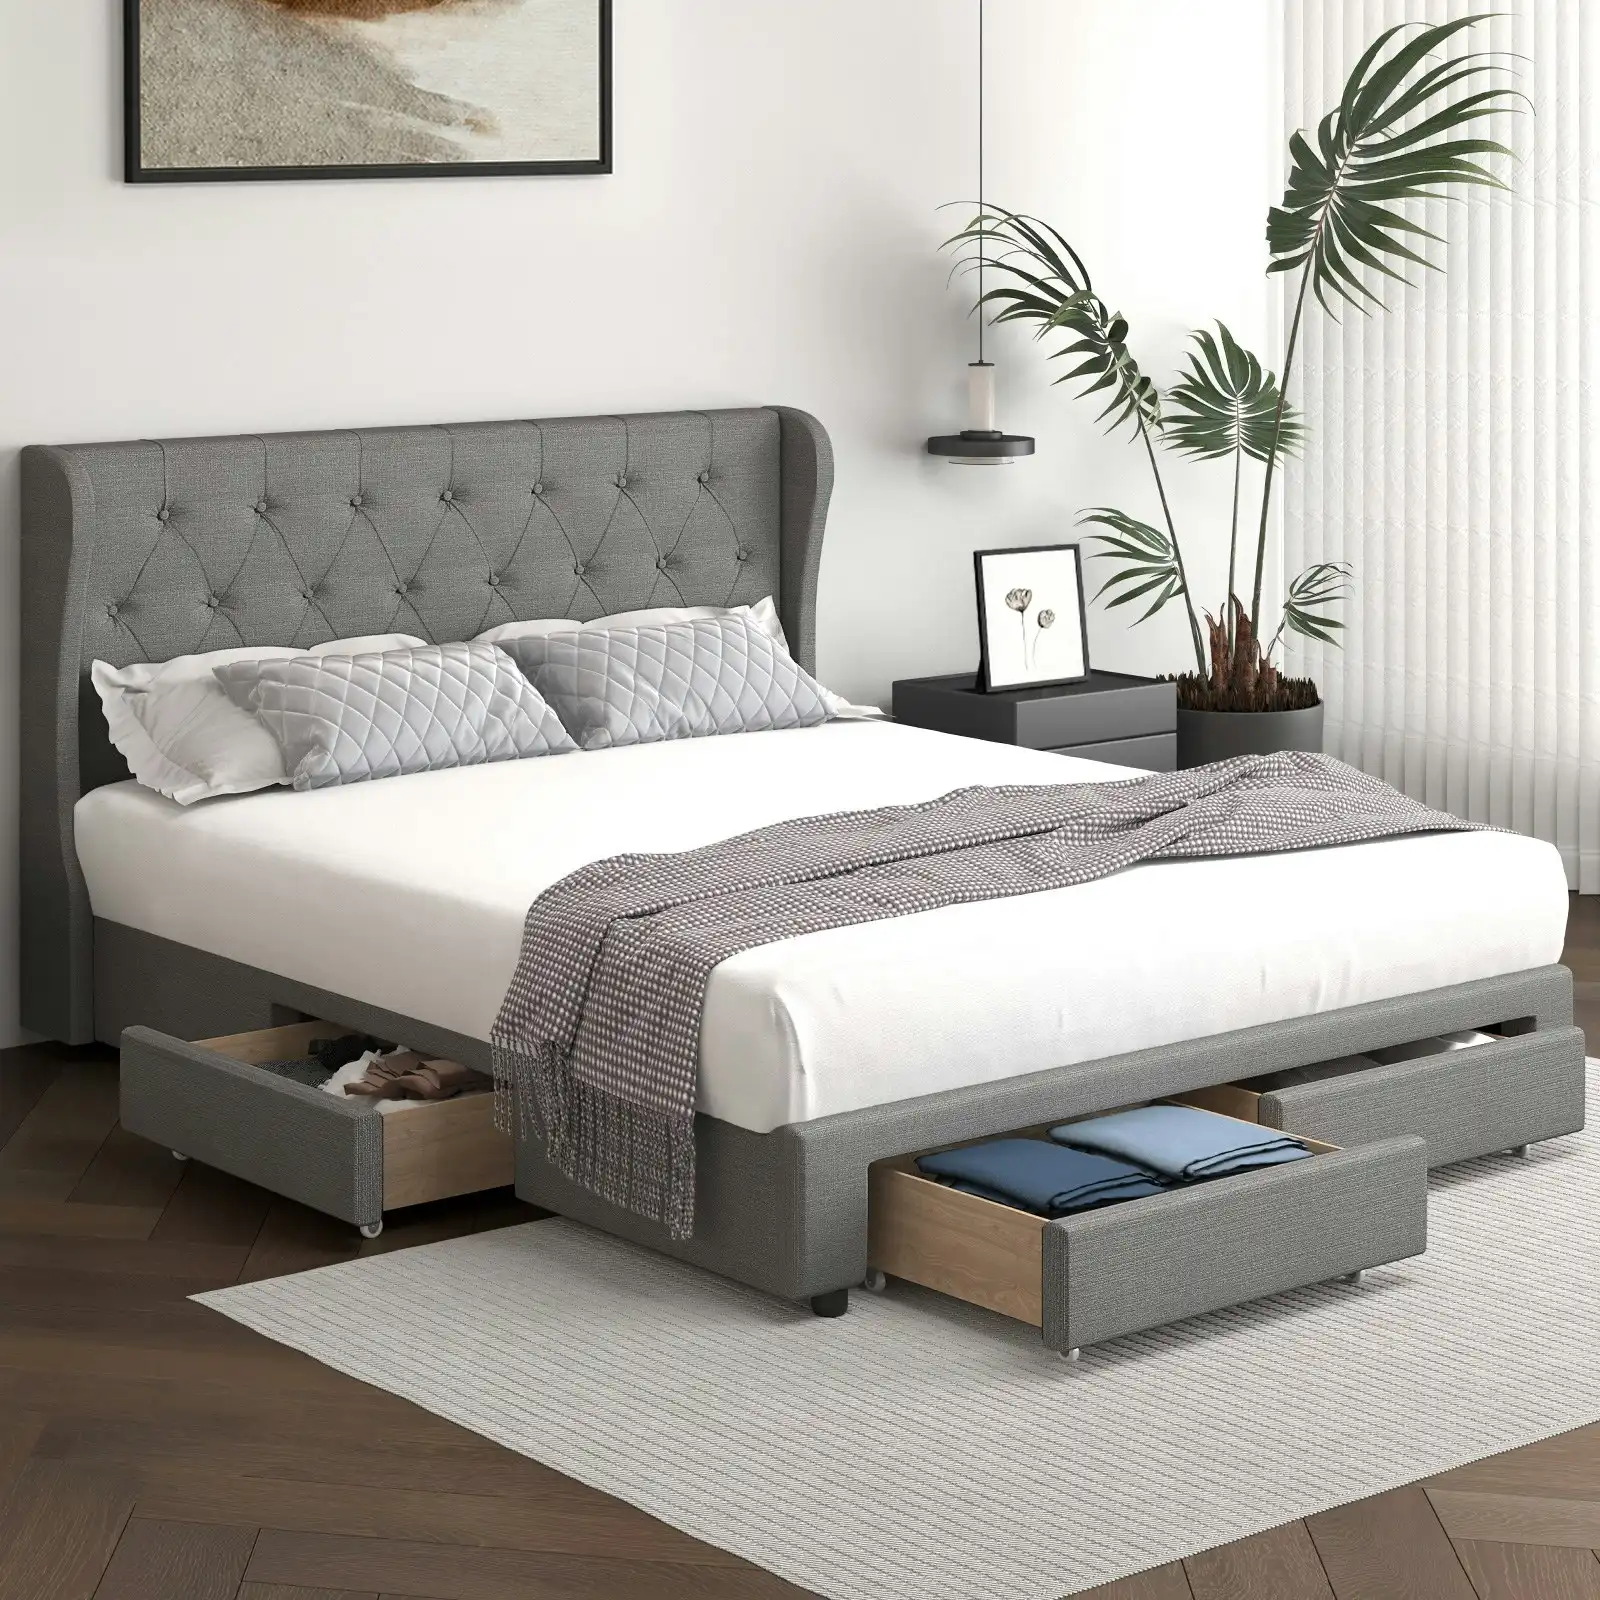 Oikiture Bed Frame Double Size Base With 4 Storage Drawers